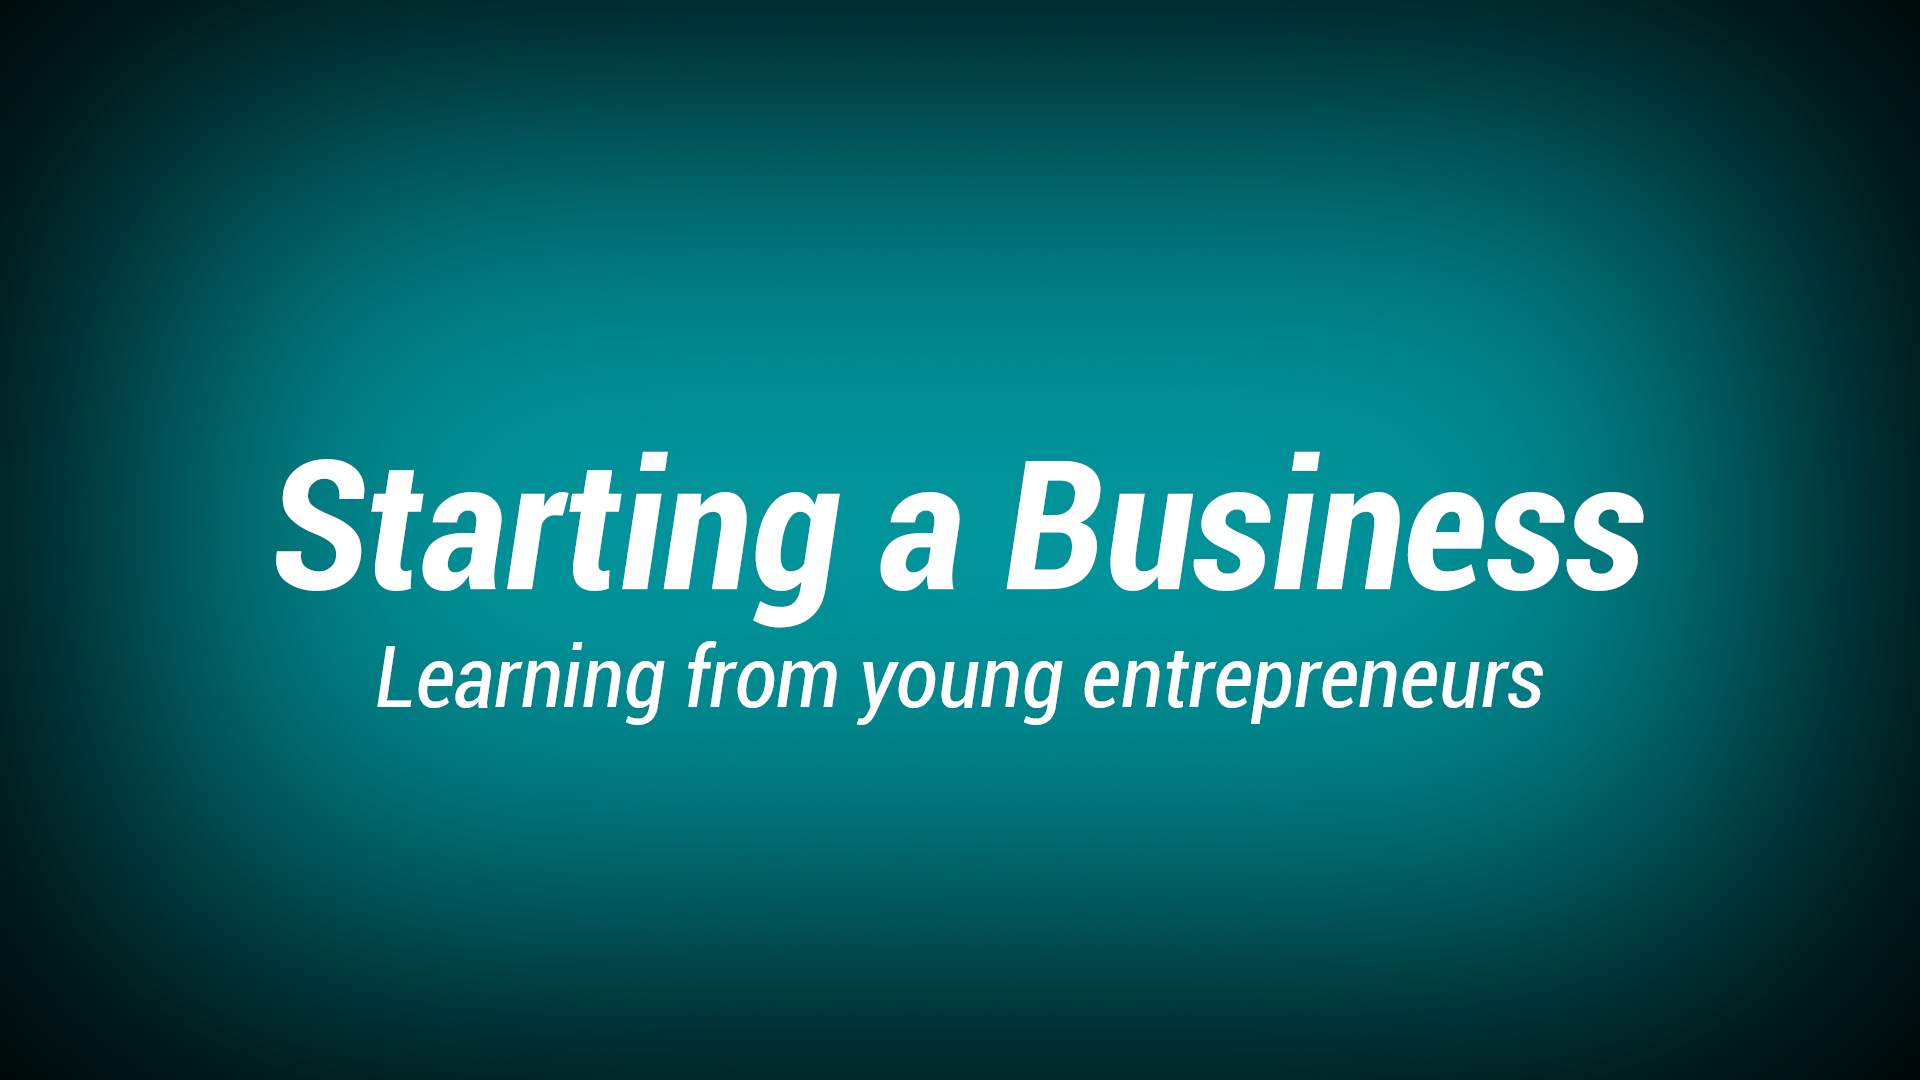 8. Starting a business / Starting a company in Bordeaux